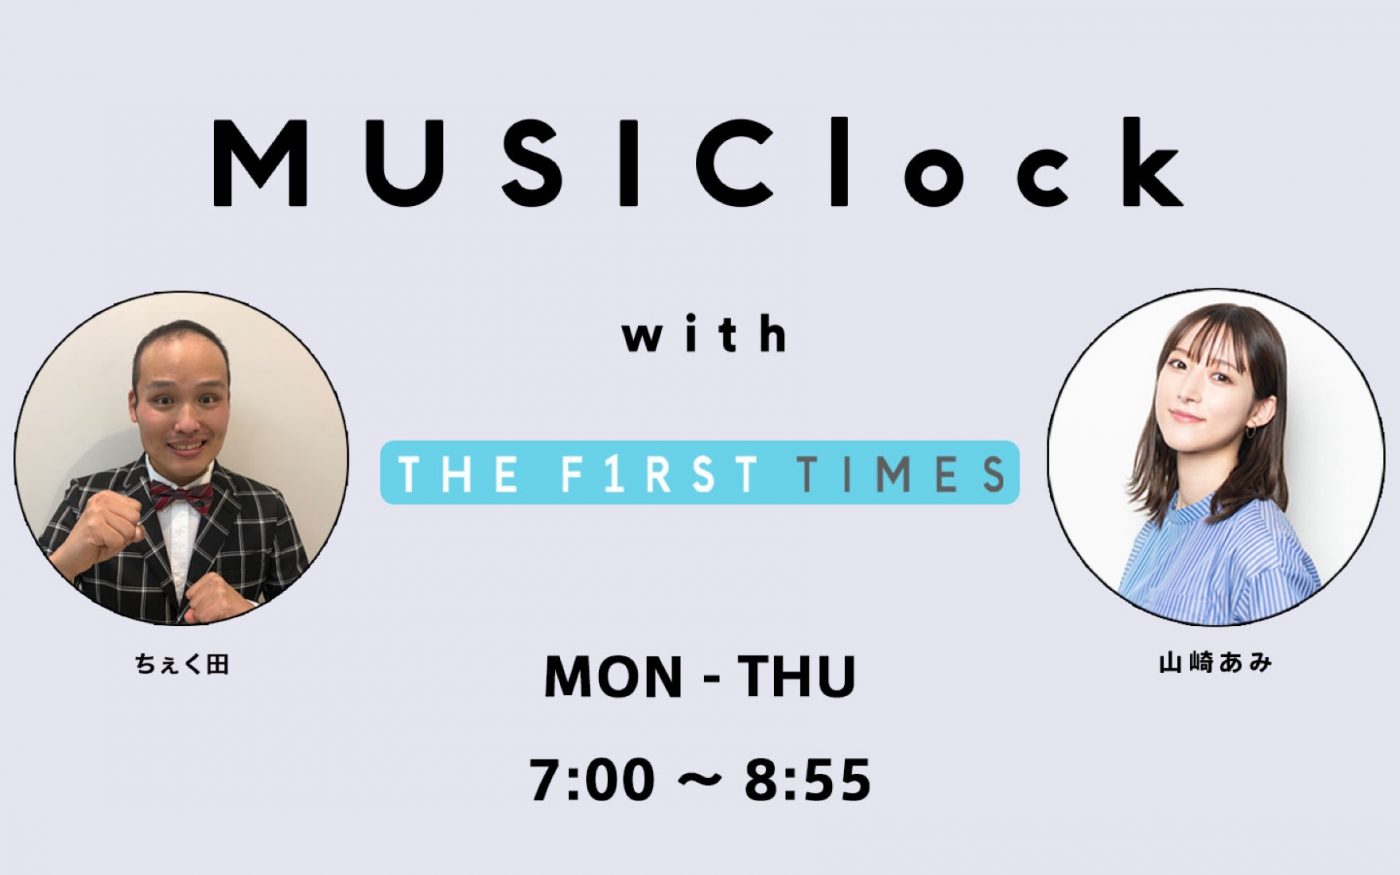 interfm『MUSIClock with THE FIRST TIMES』の7月度前半のSMA芸人が“ちぇく田”に決定